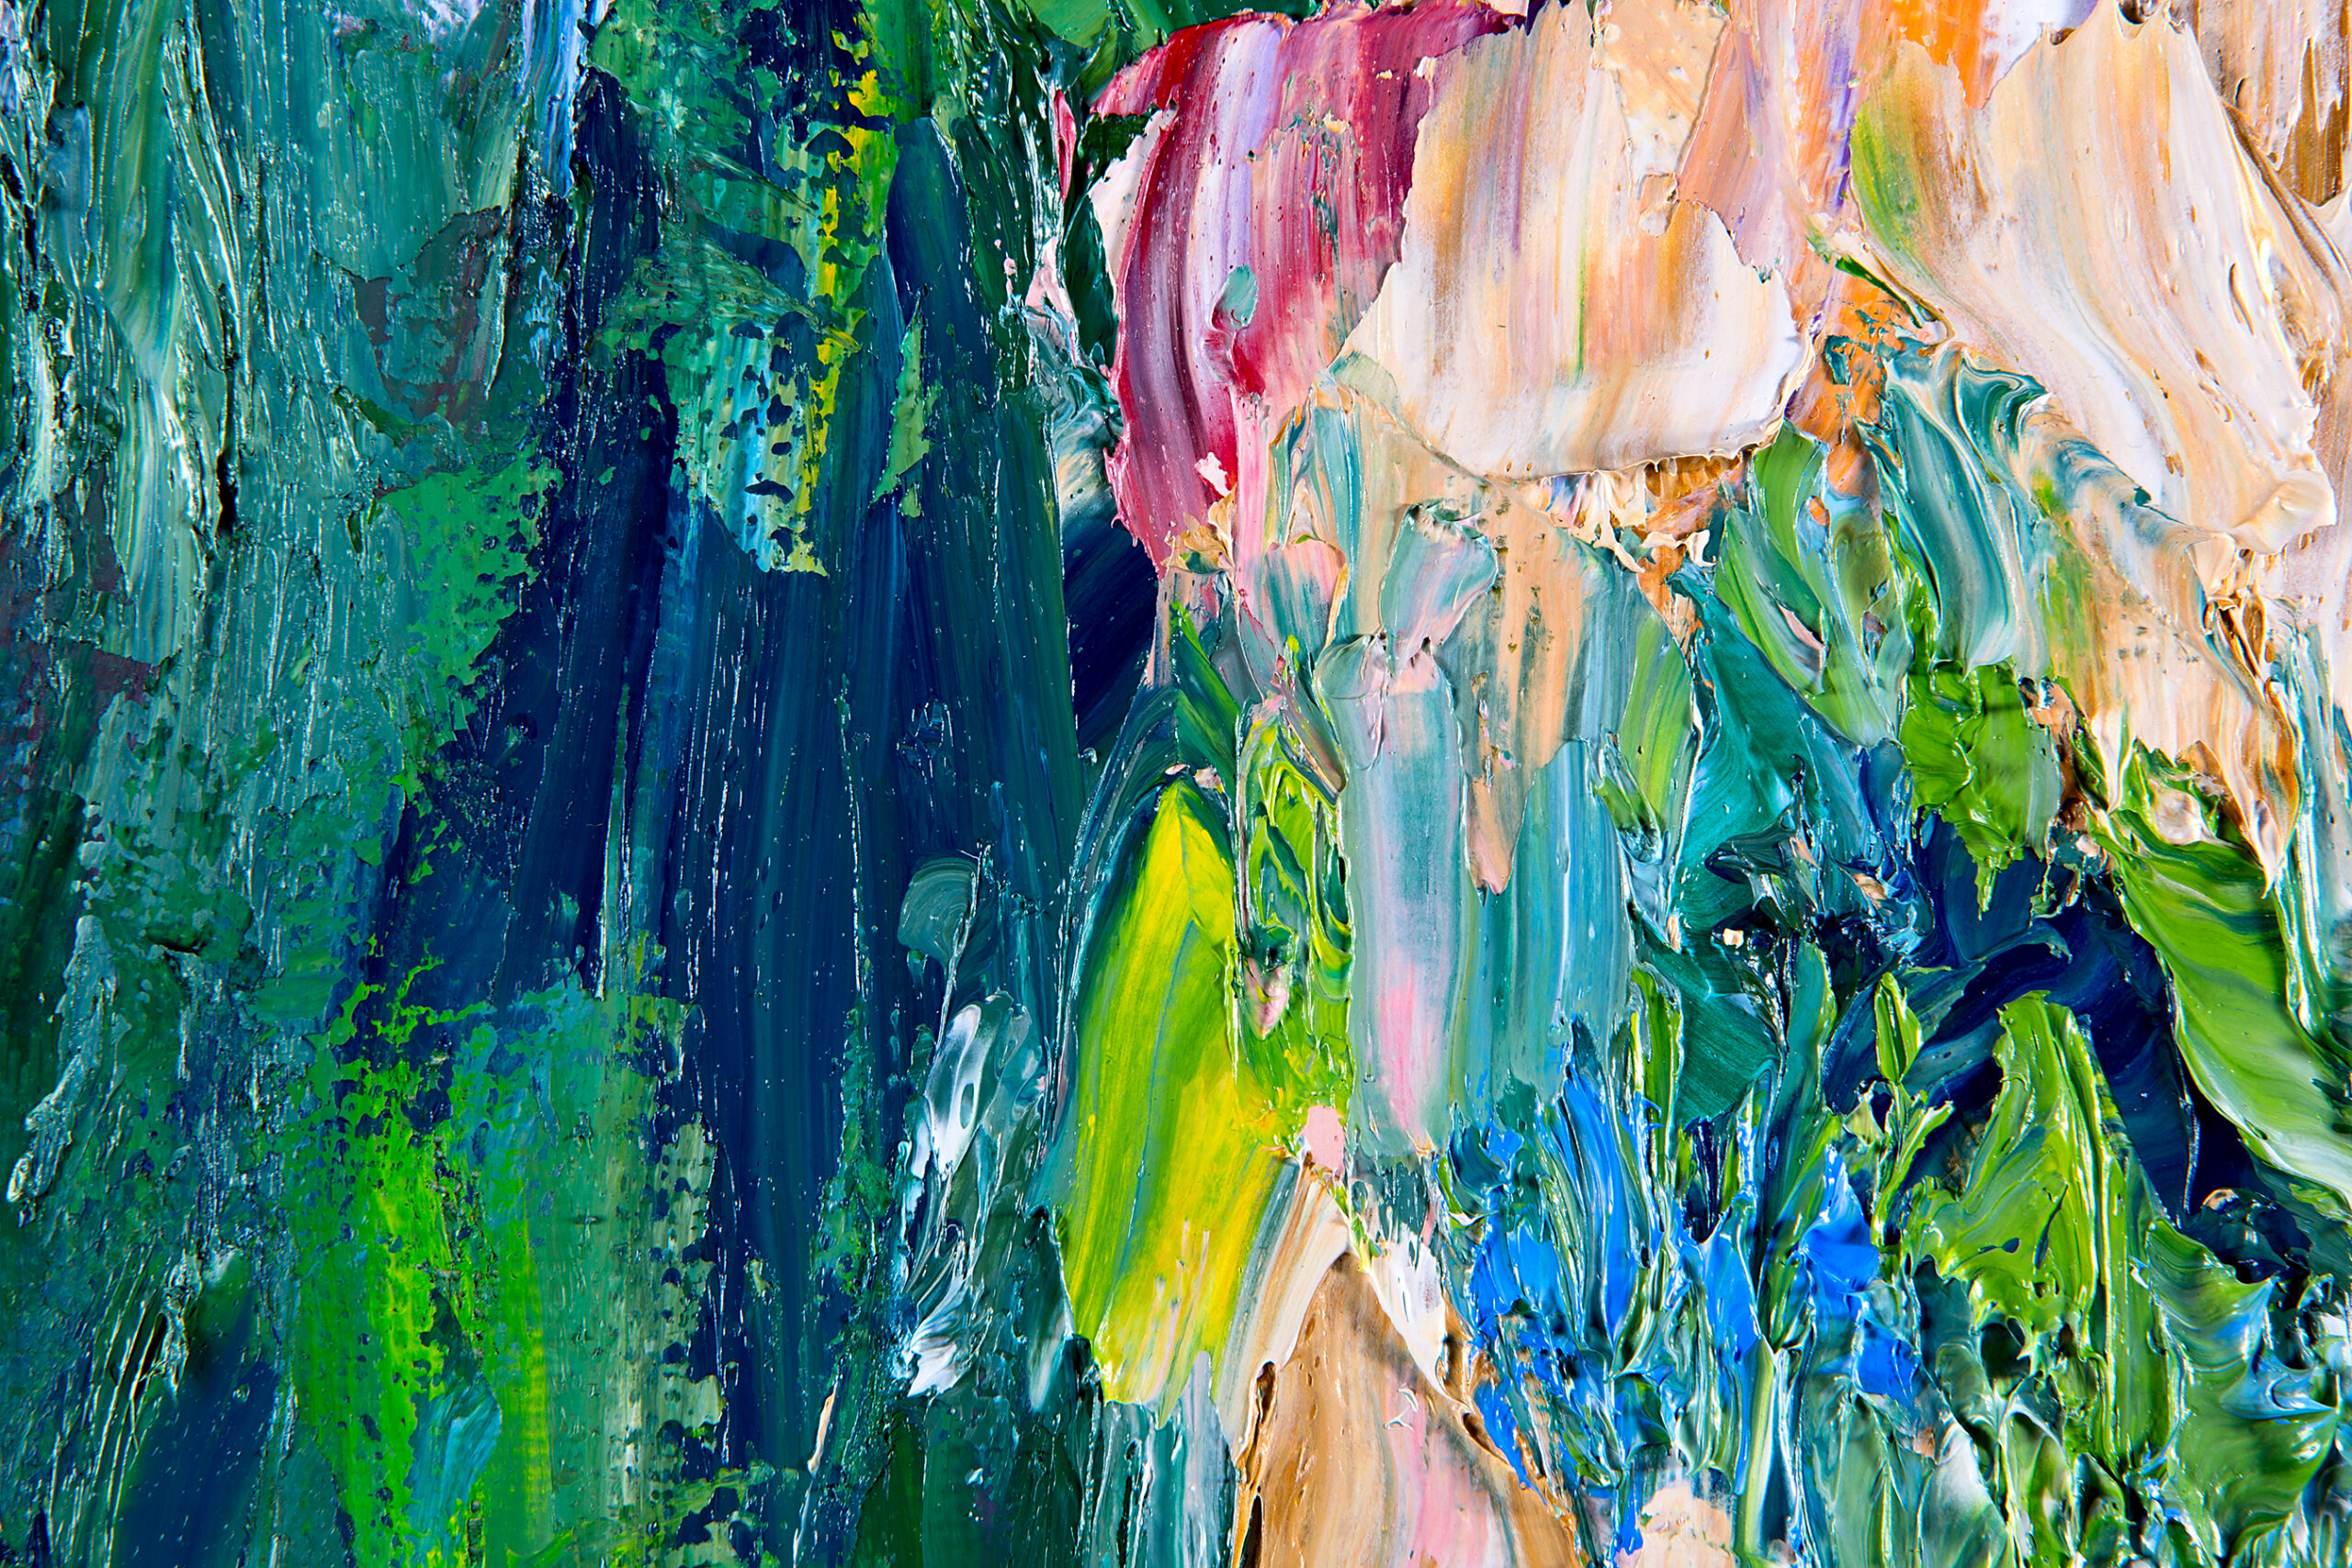 Image is a close up of an oil painting with varying colors of paint smeared on the canvas.